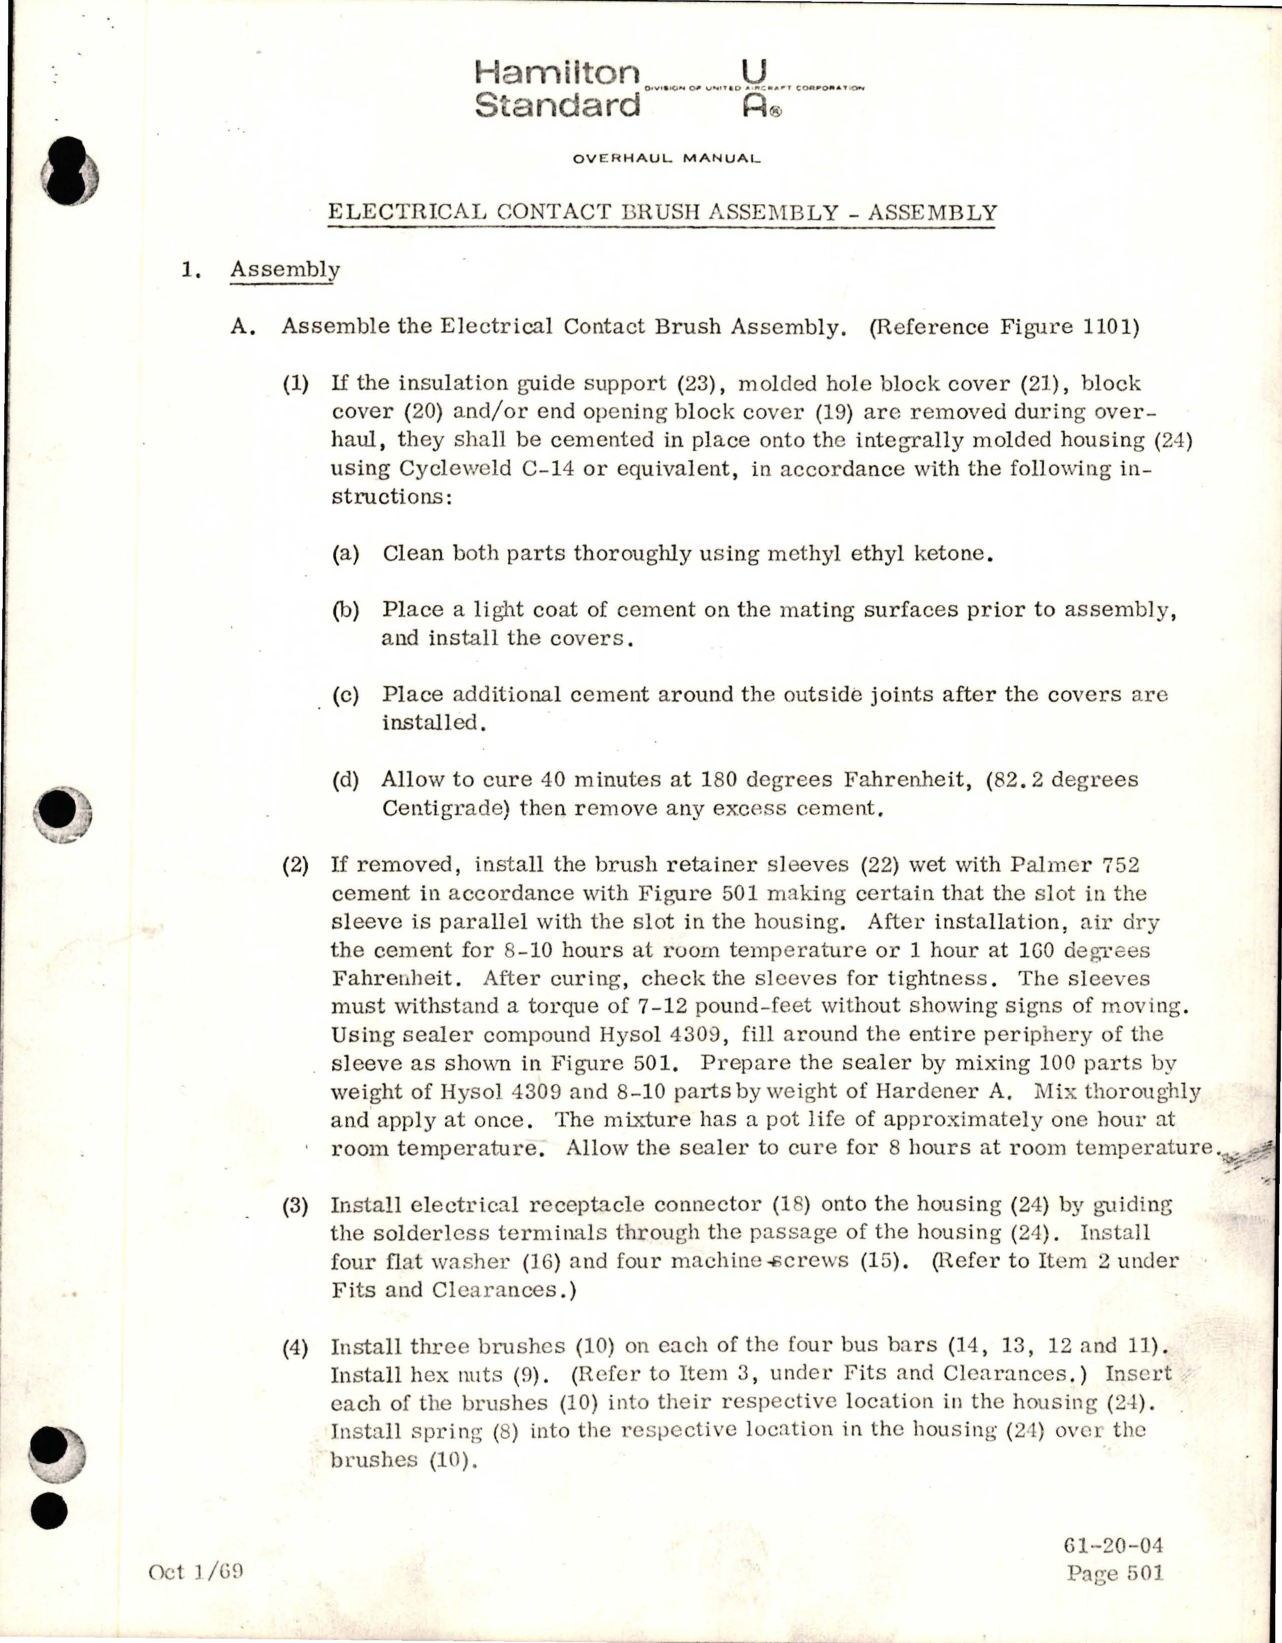 Sample page 7 from AirCorps Library document: Overhaul Manual for Electrical Contact Brush Assembly Description and Operation 